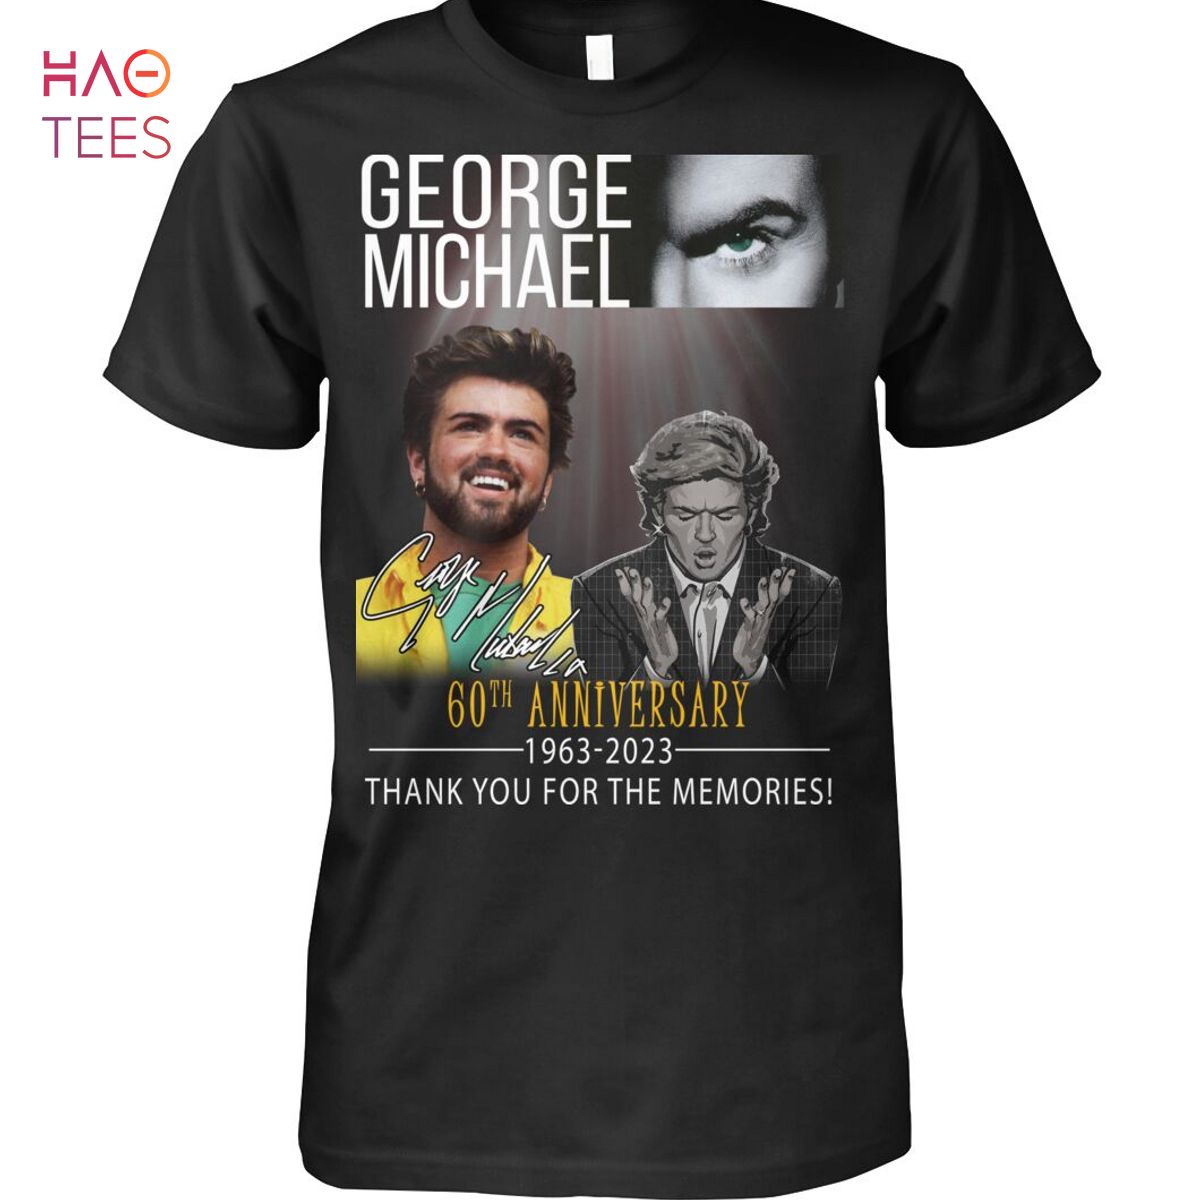 George Michael 60 Anniversary 1963 2023 Thank You For The Memories T Shirt Unisex T Shirt